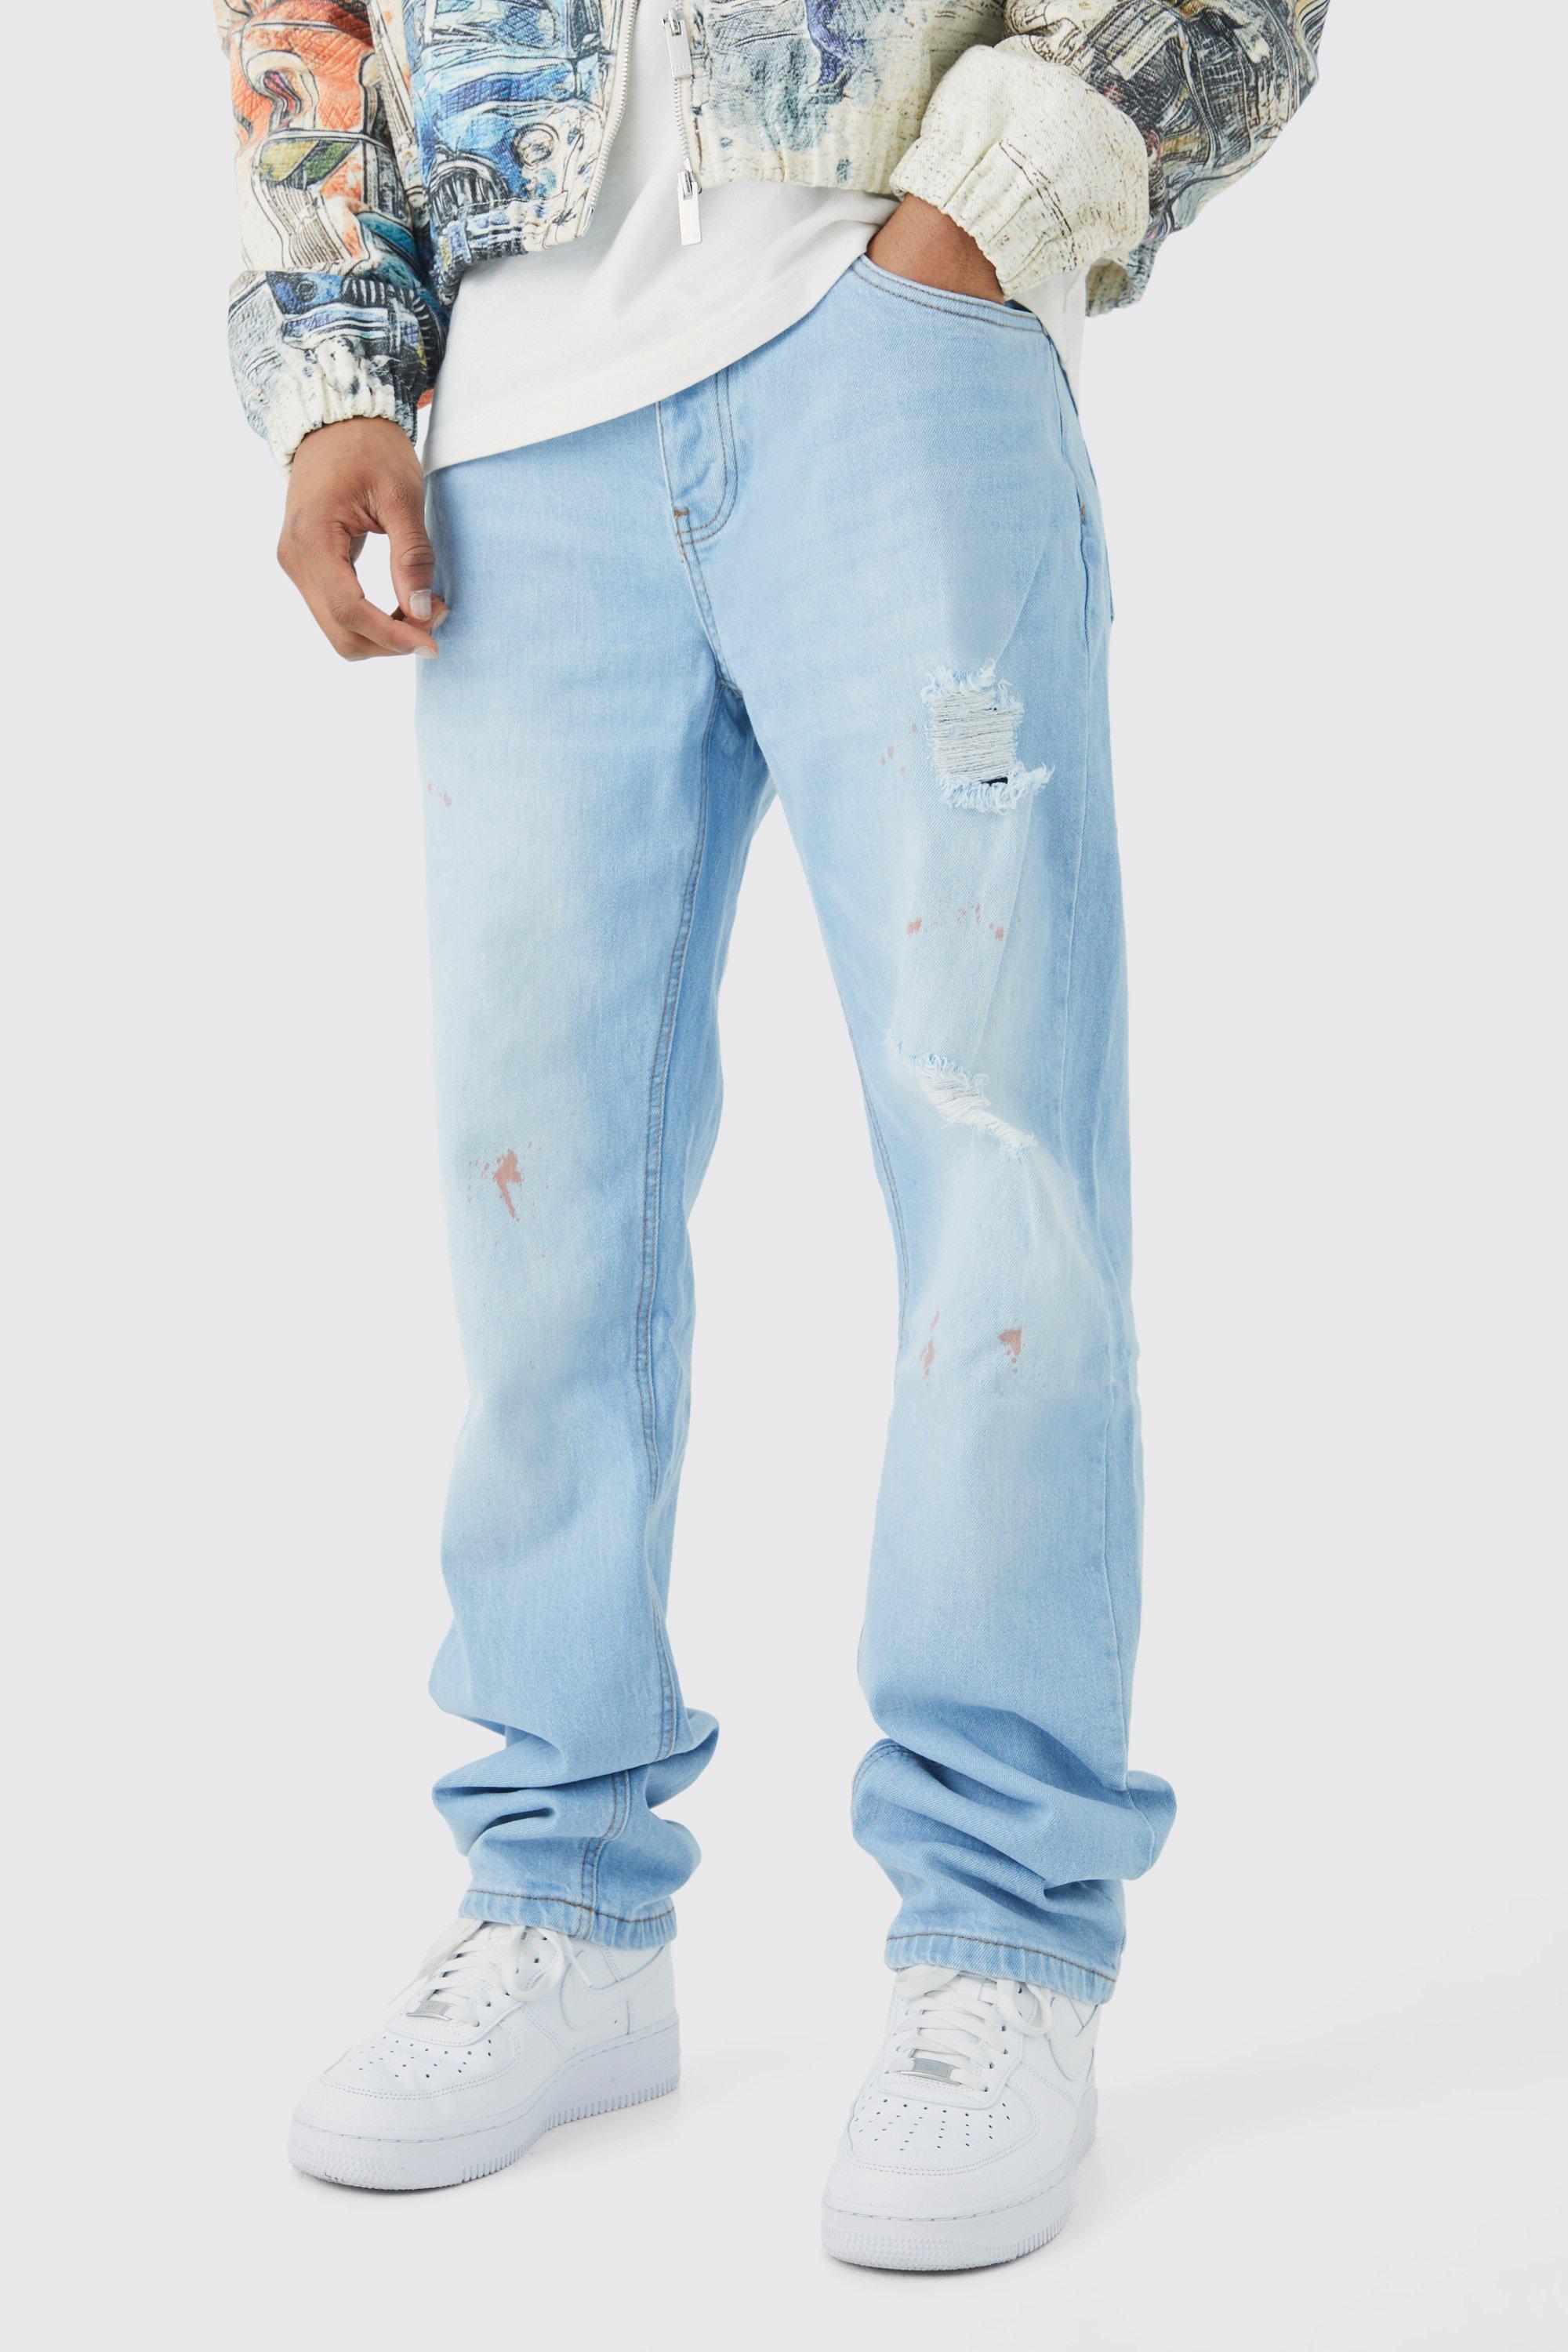 boohooMAN Men's Relaxed Fit Diamond Jacquard Jeans